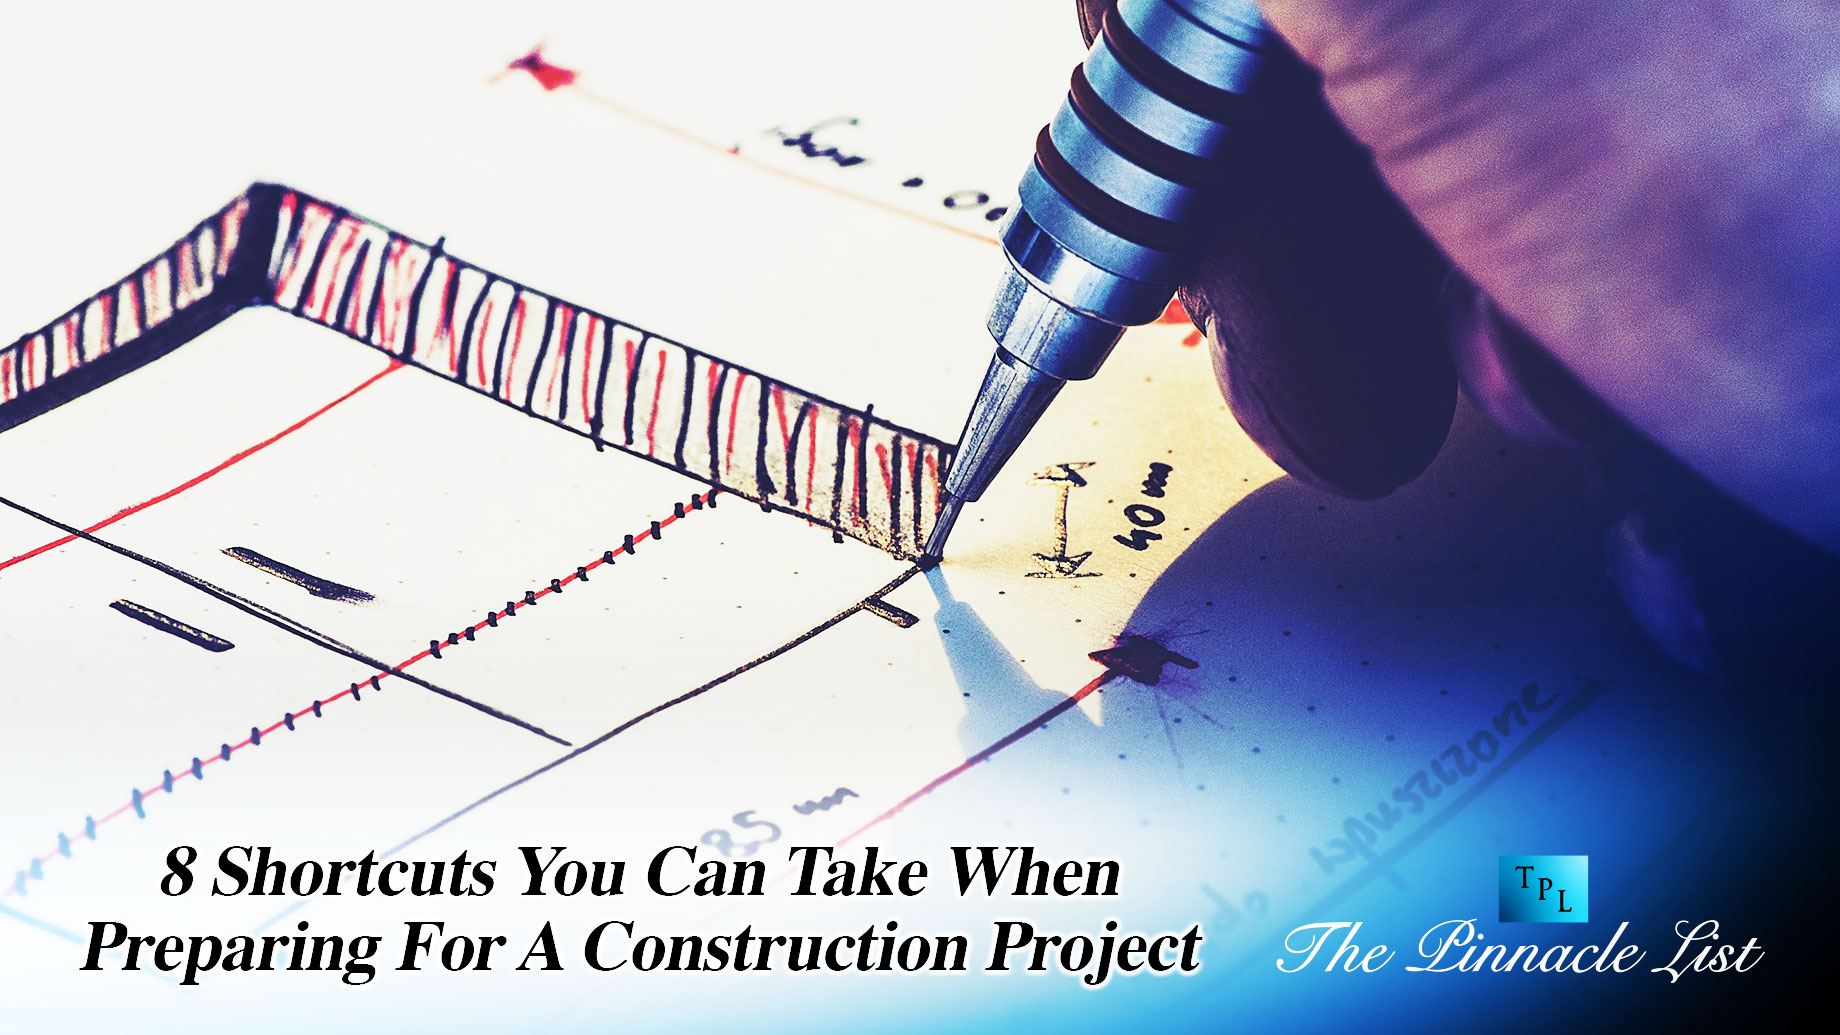 8 Shortcuts You Can Take When Preparing For A Construction Project